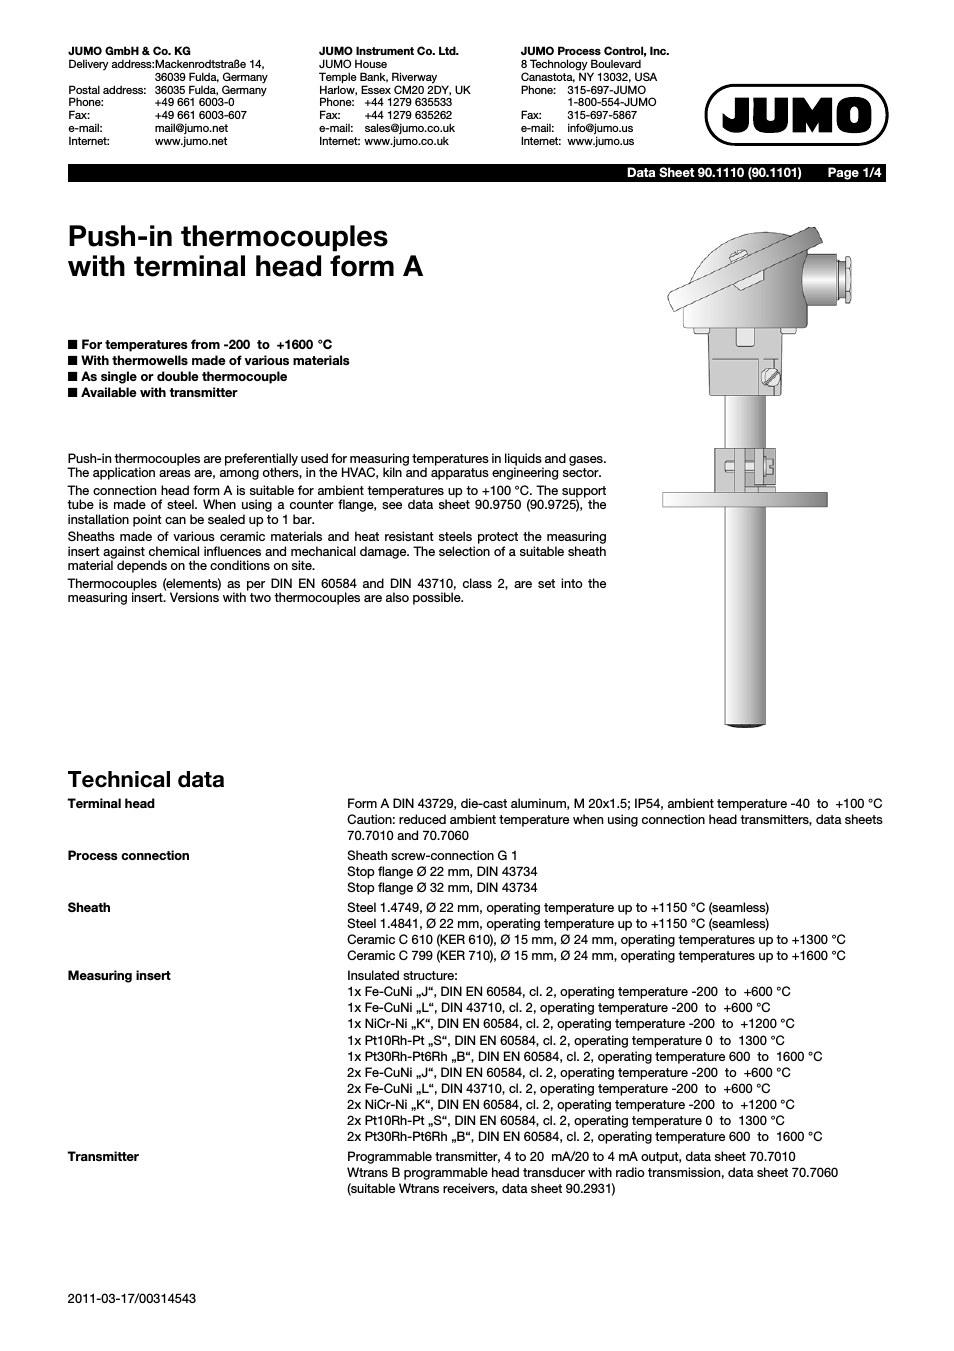 901110 Push-in Thermocouples with Form A Terminal Head Data Sheet